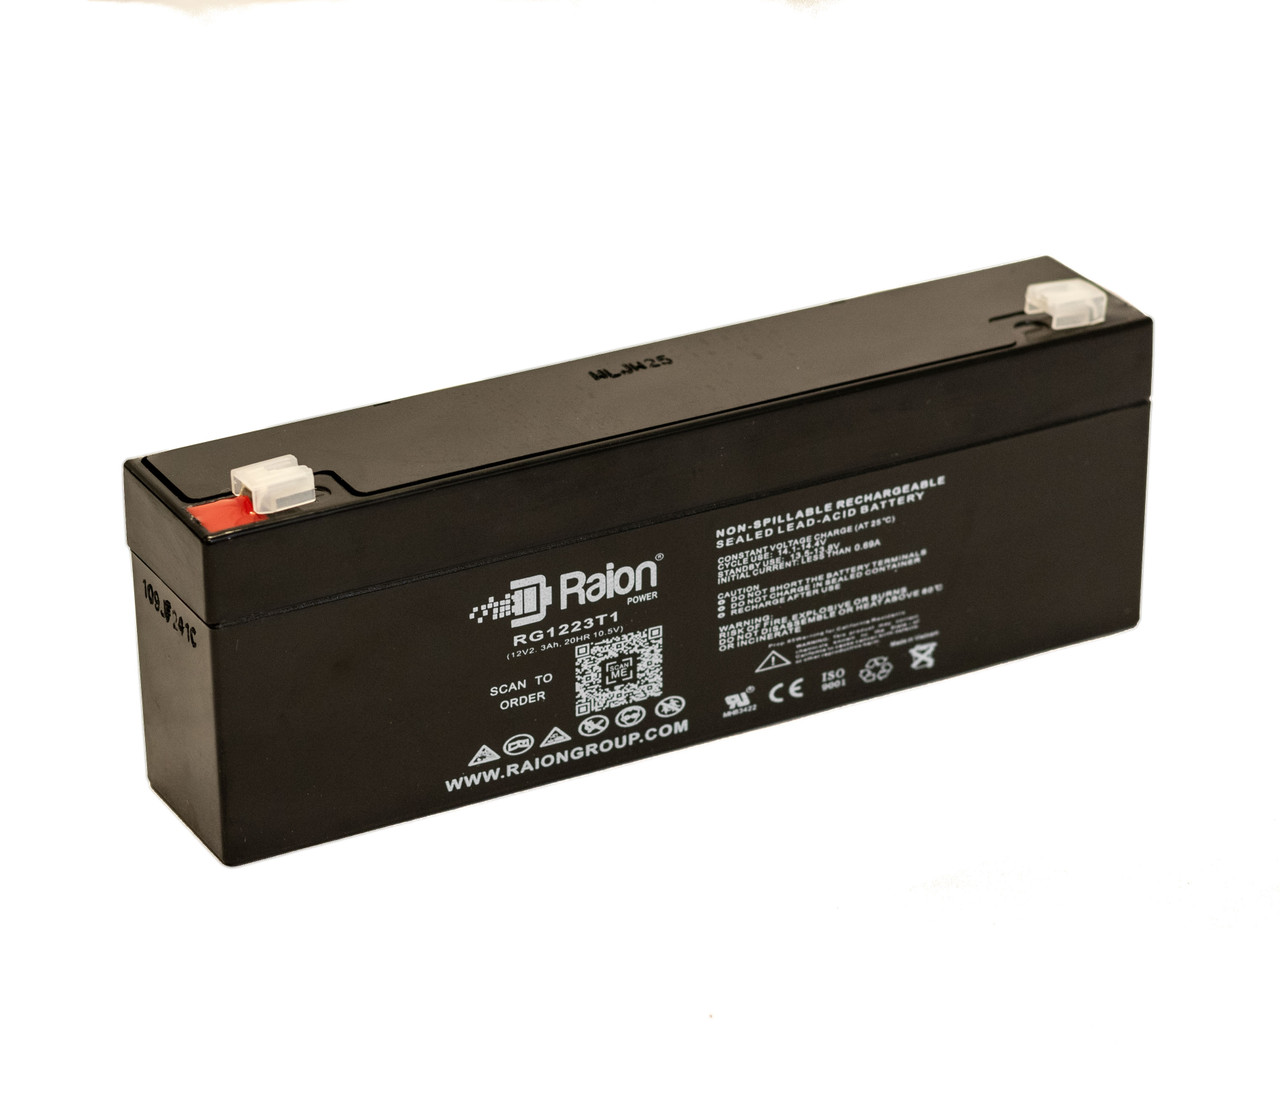 Raion Power RG1223T1 Replacement Battery for Baxter Healthcare AS2